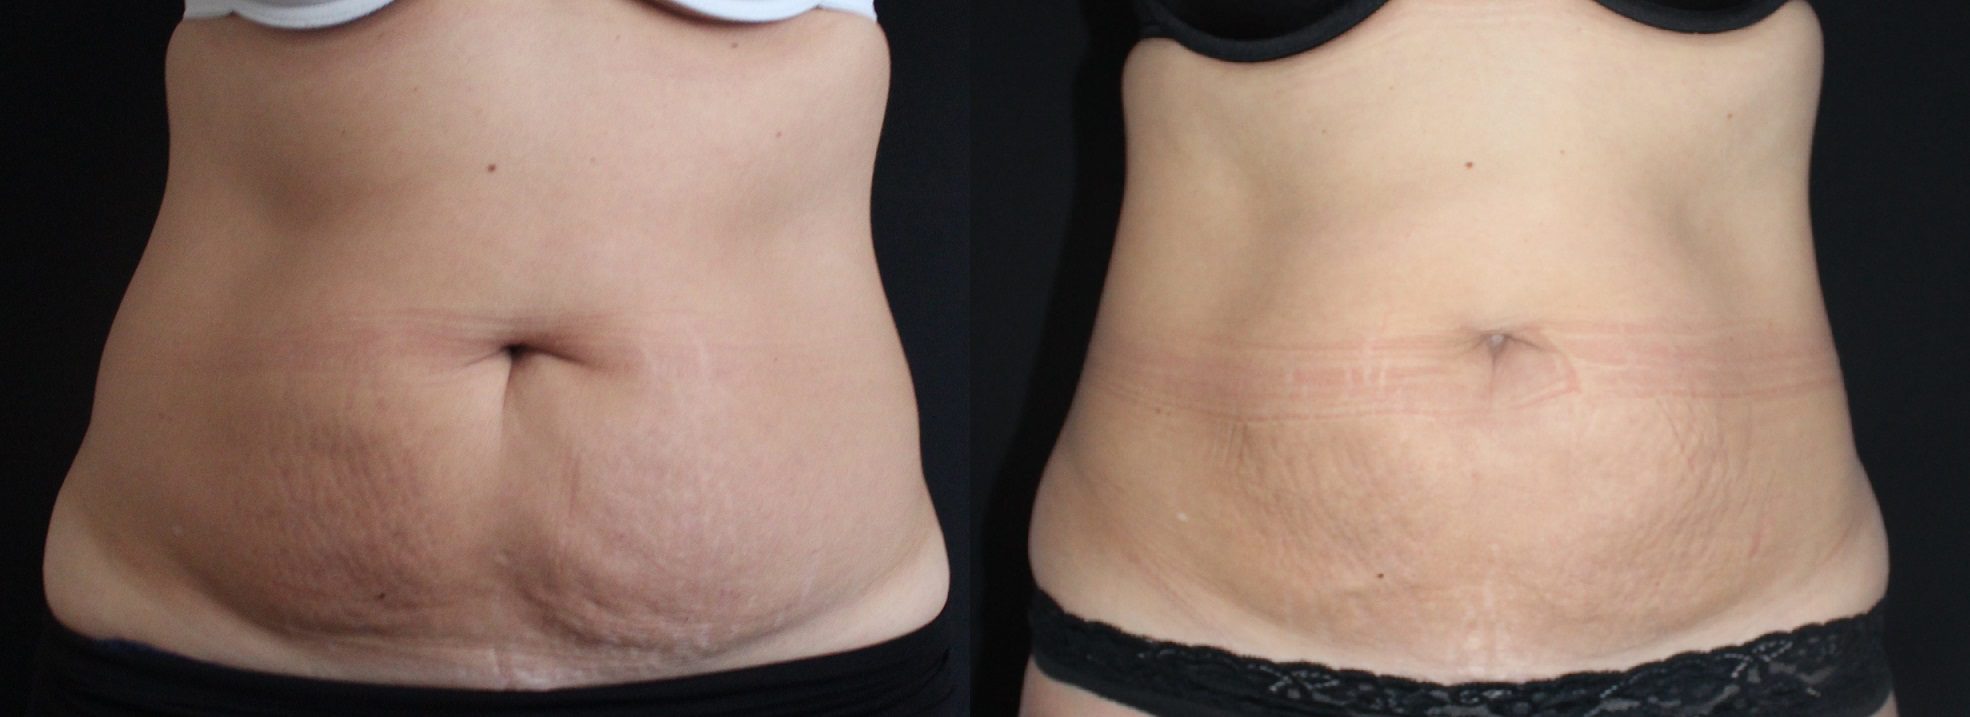 CoolSculpting before and after abdomen and waist